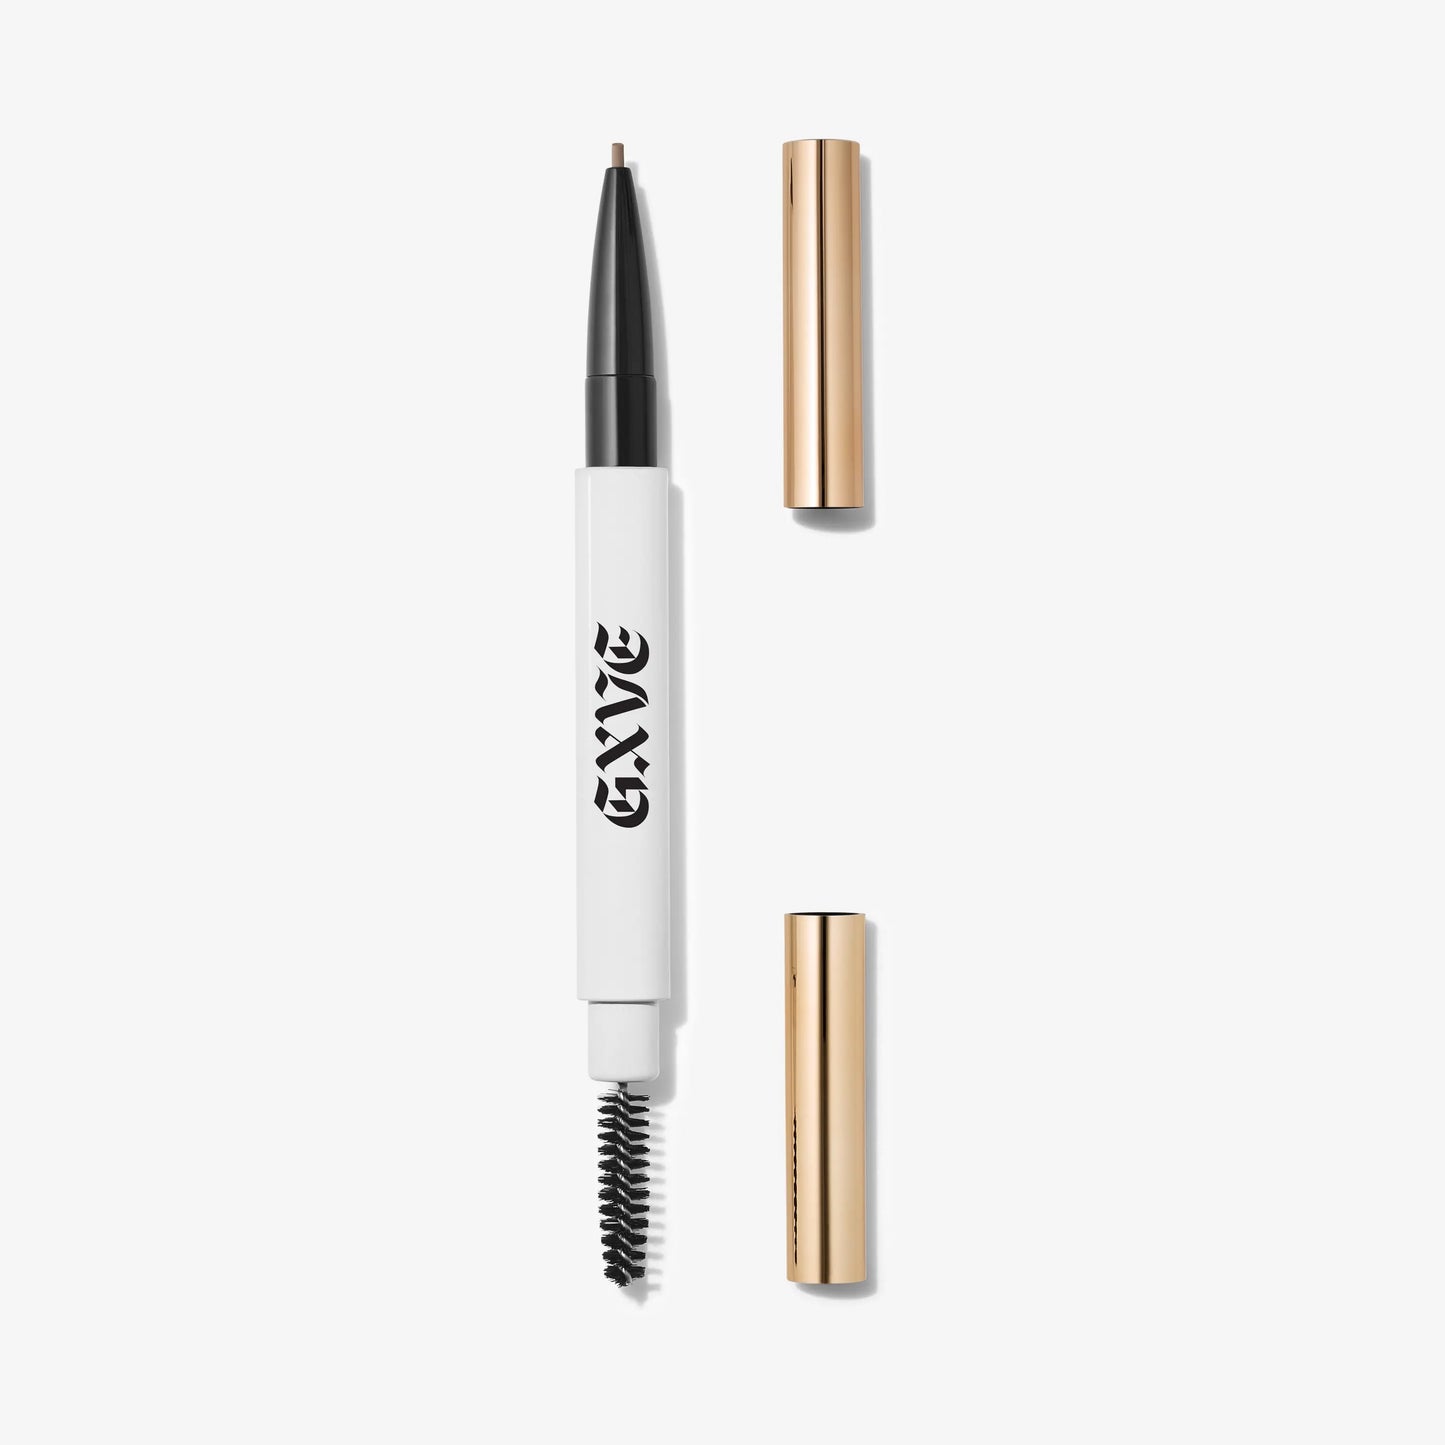 GXVE 2 - Ultra-Fine Eyebrow Pencil For Natural Brows